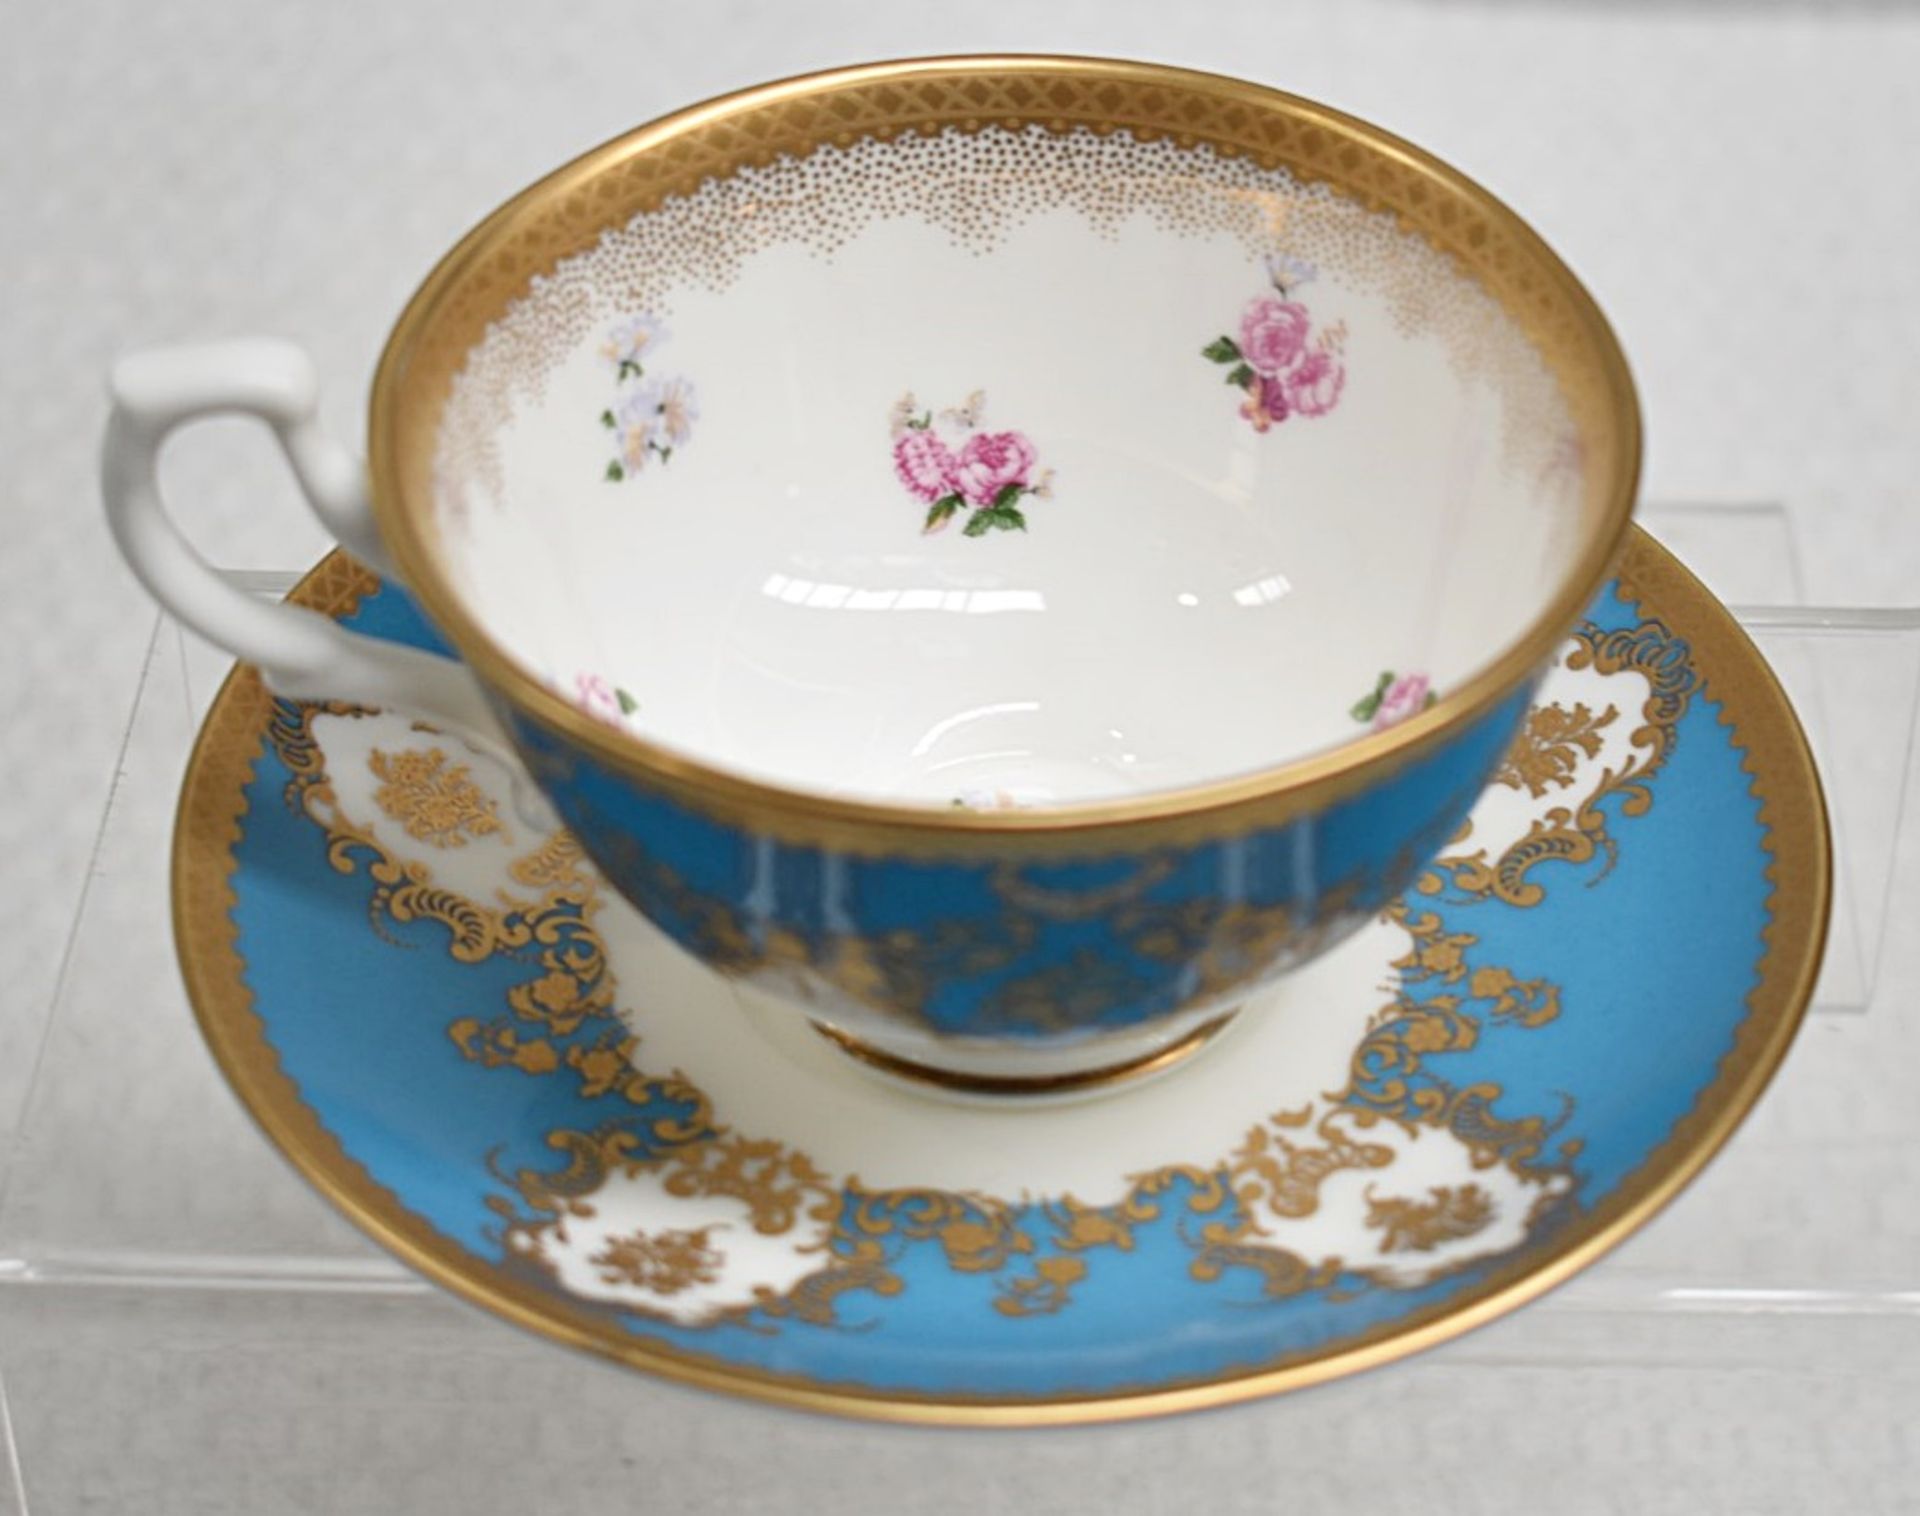 1 x ROYAL COLLECTION TRUST 'Coat of Arms' Fine Bone China Teacup and Saucer Set, Hand finished - Image 2 of 9